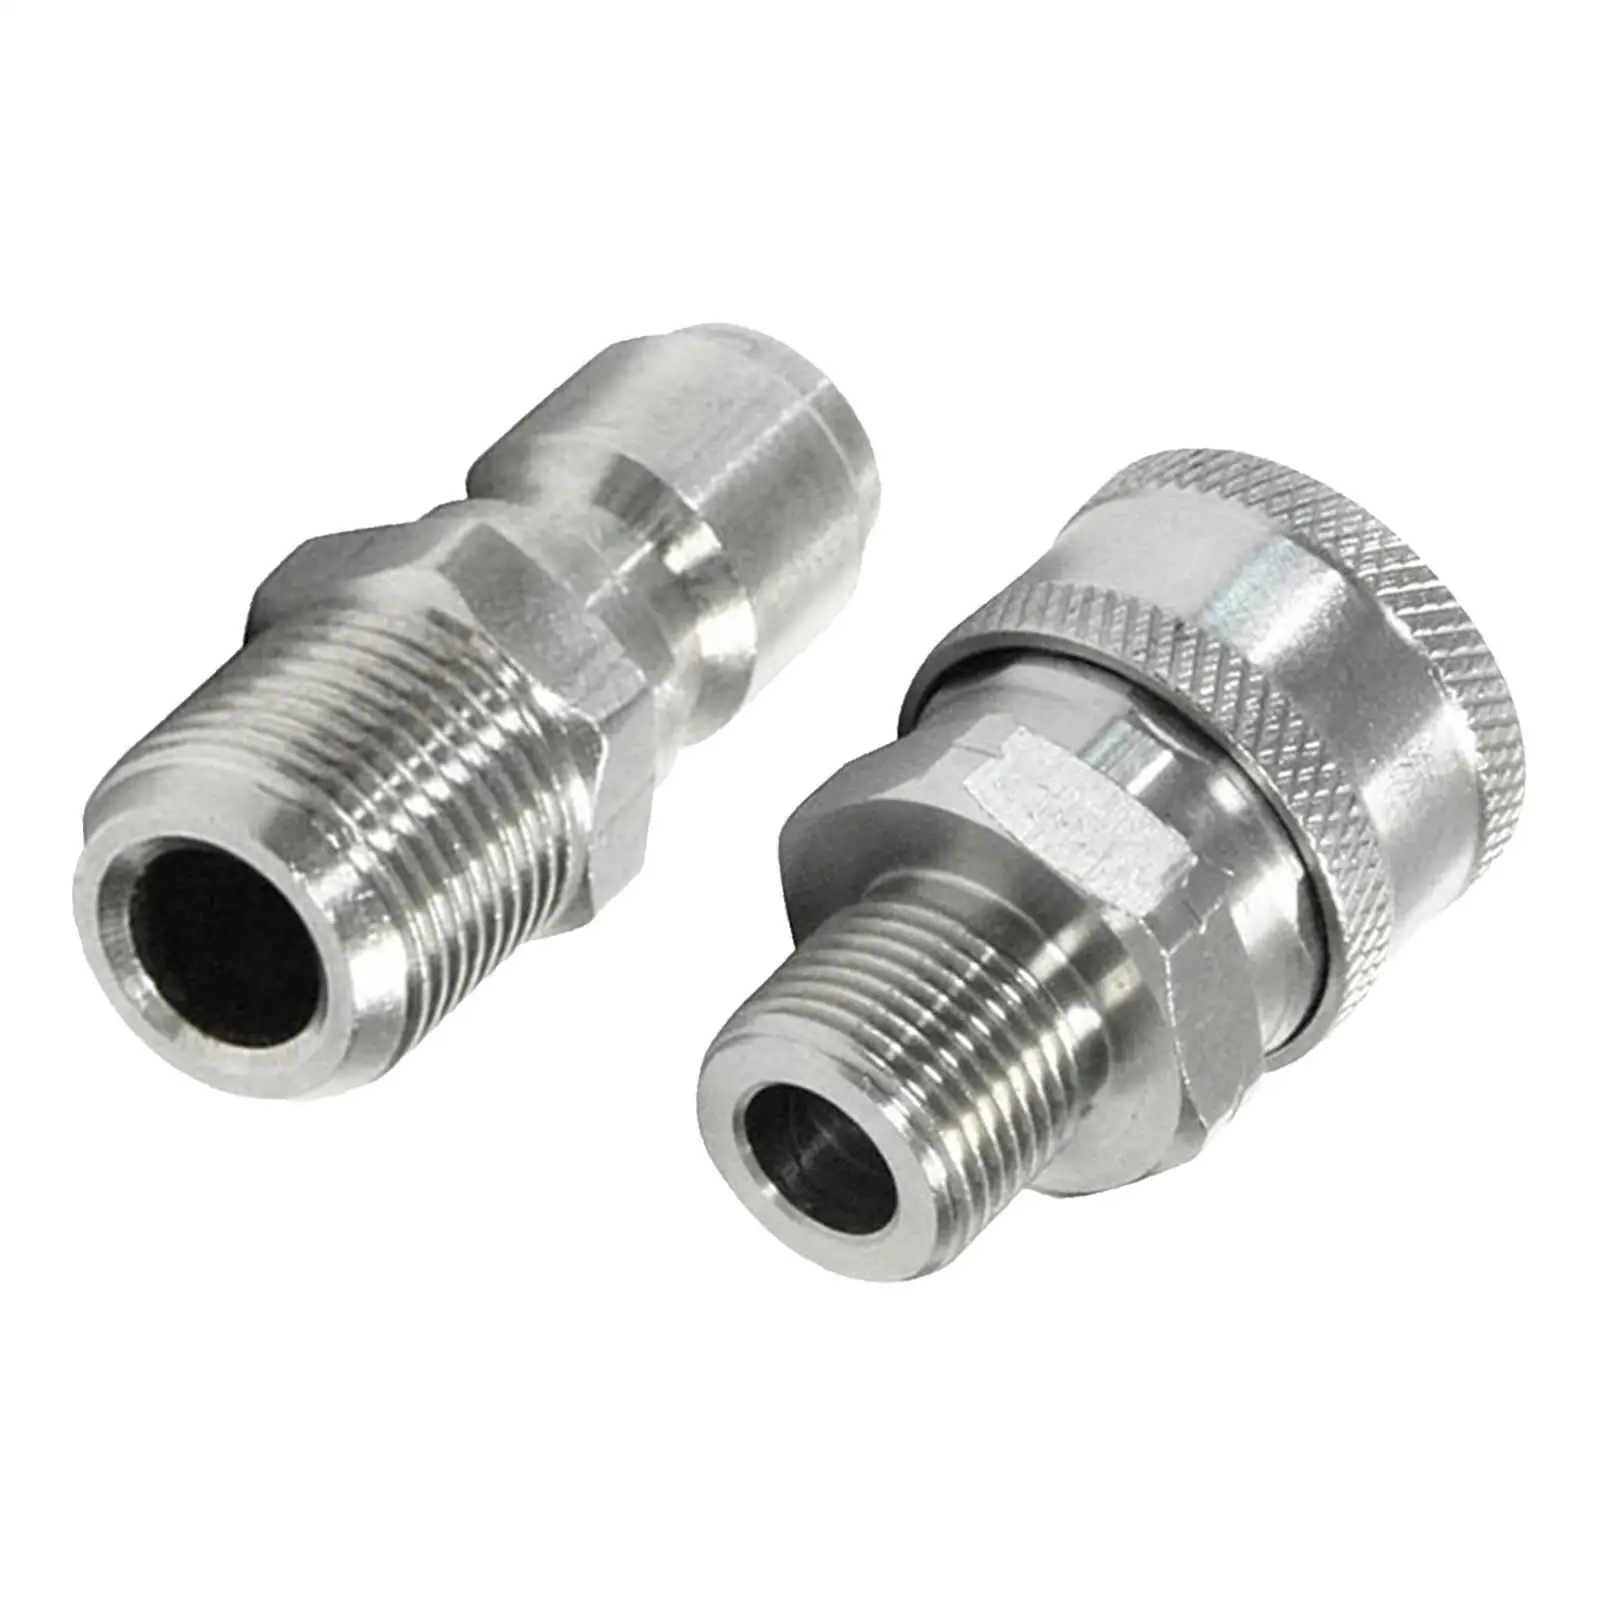 Pressure Washer Adapter 3/8’’ Male Female Thread Fitting for Hot and Cold Water Telescopic Rod Hose Daily Tool Water Pump Nozzle